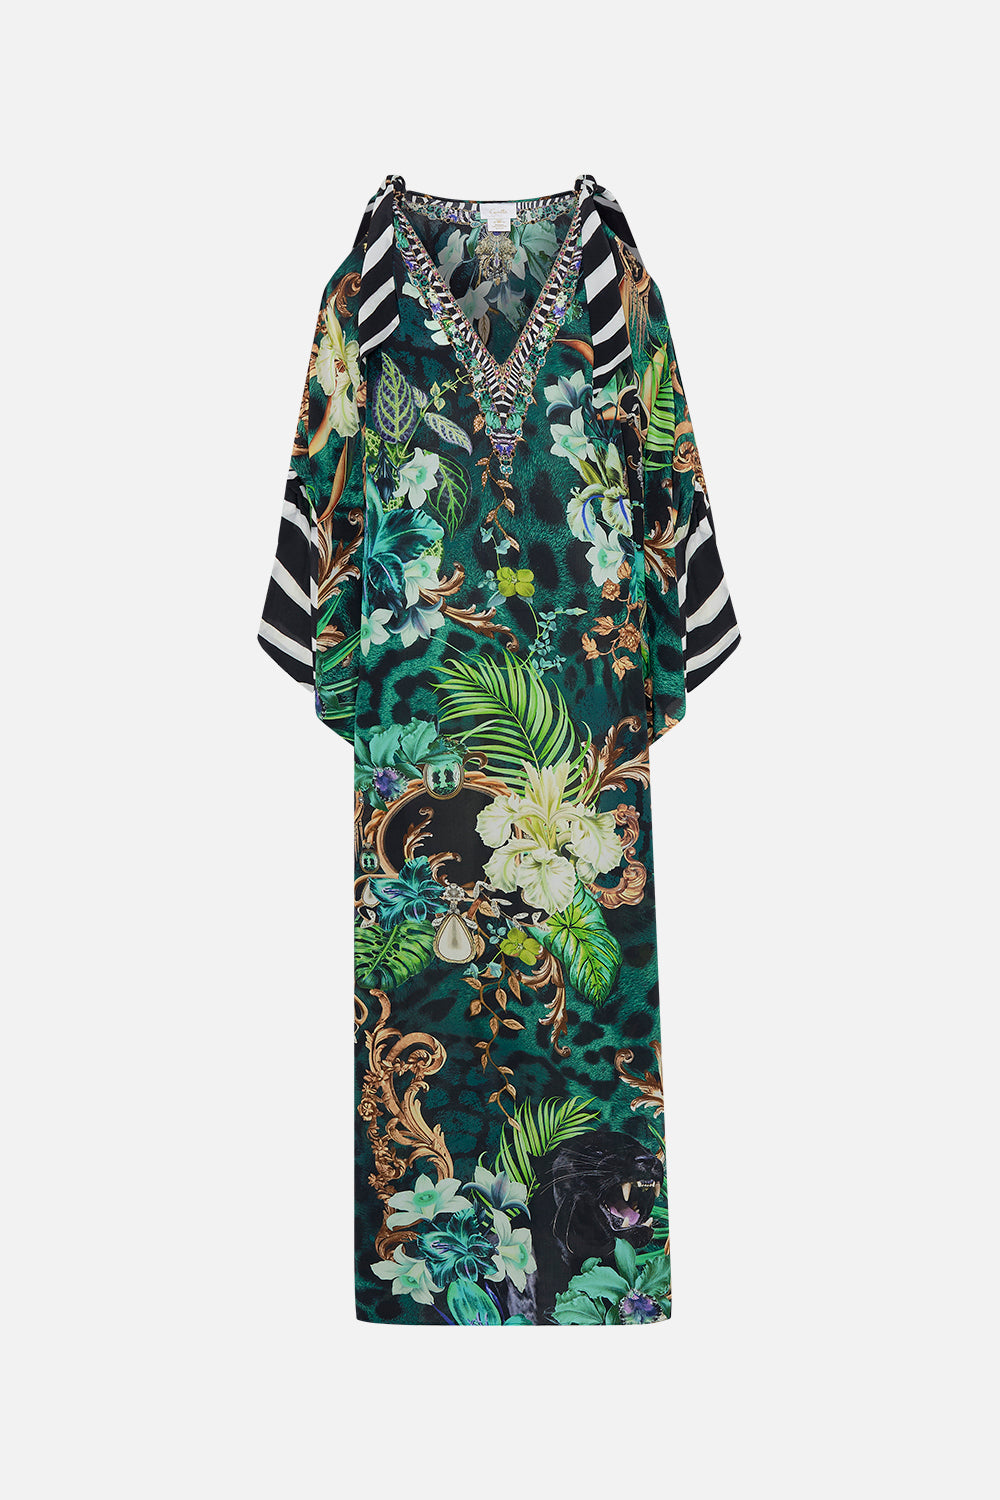 Product view of CAMILLA silk kaftan in Sing My Song print